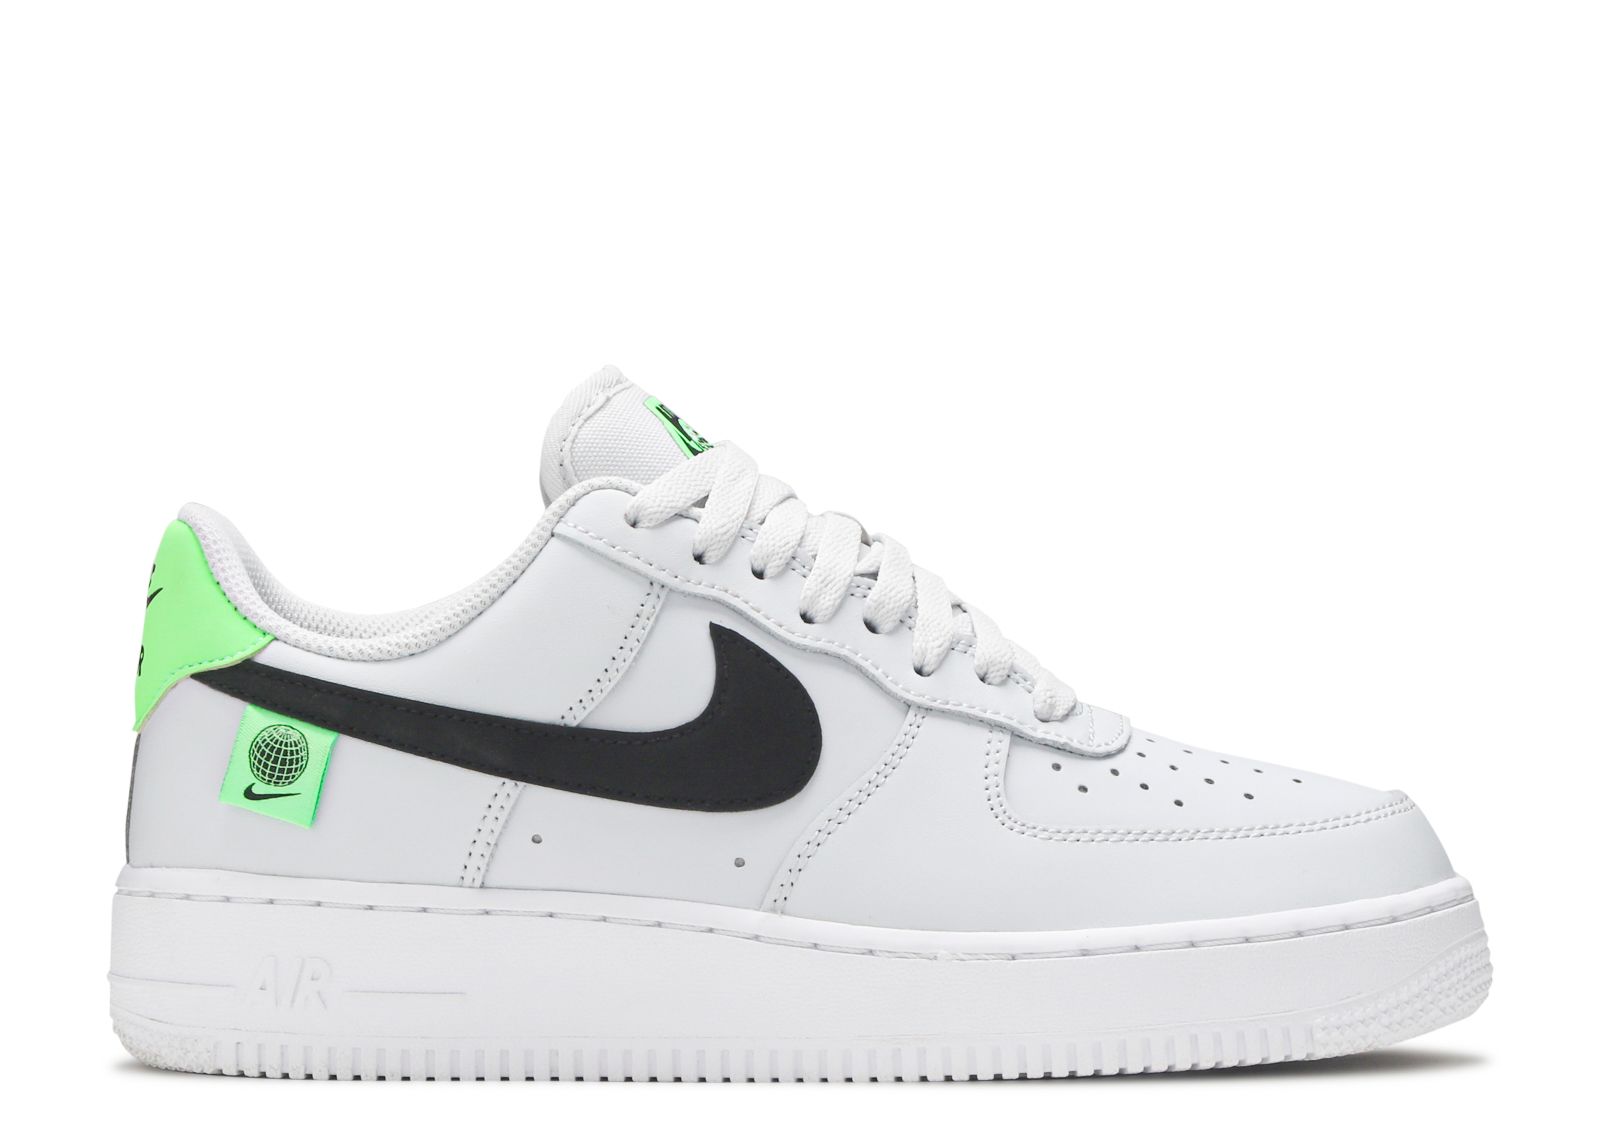 Кроссовки Nike Air Force 1 '07 Low 'Worldwide Pack - Platinum Green Strike', серый authentic nike air max 95 men cherry blossom worldwide pack yin yang running shoes original trainers sports sneakers runners